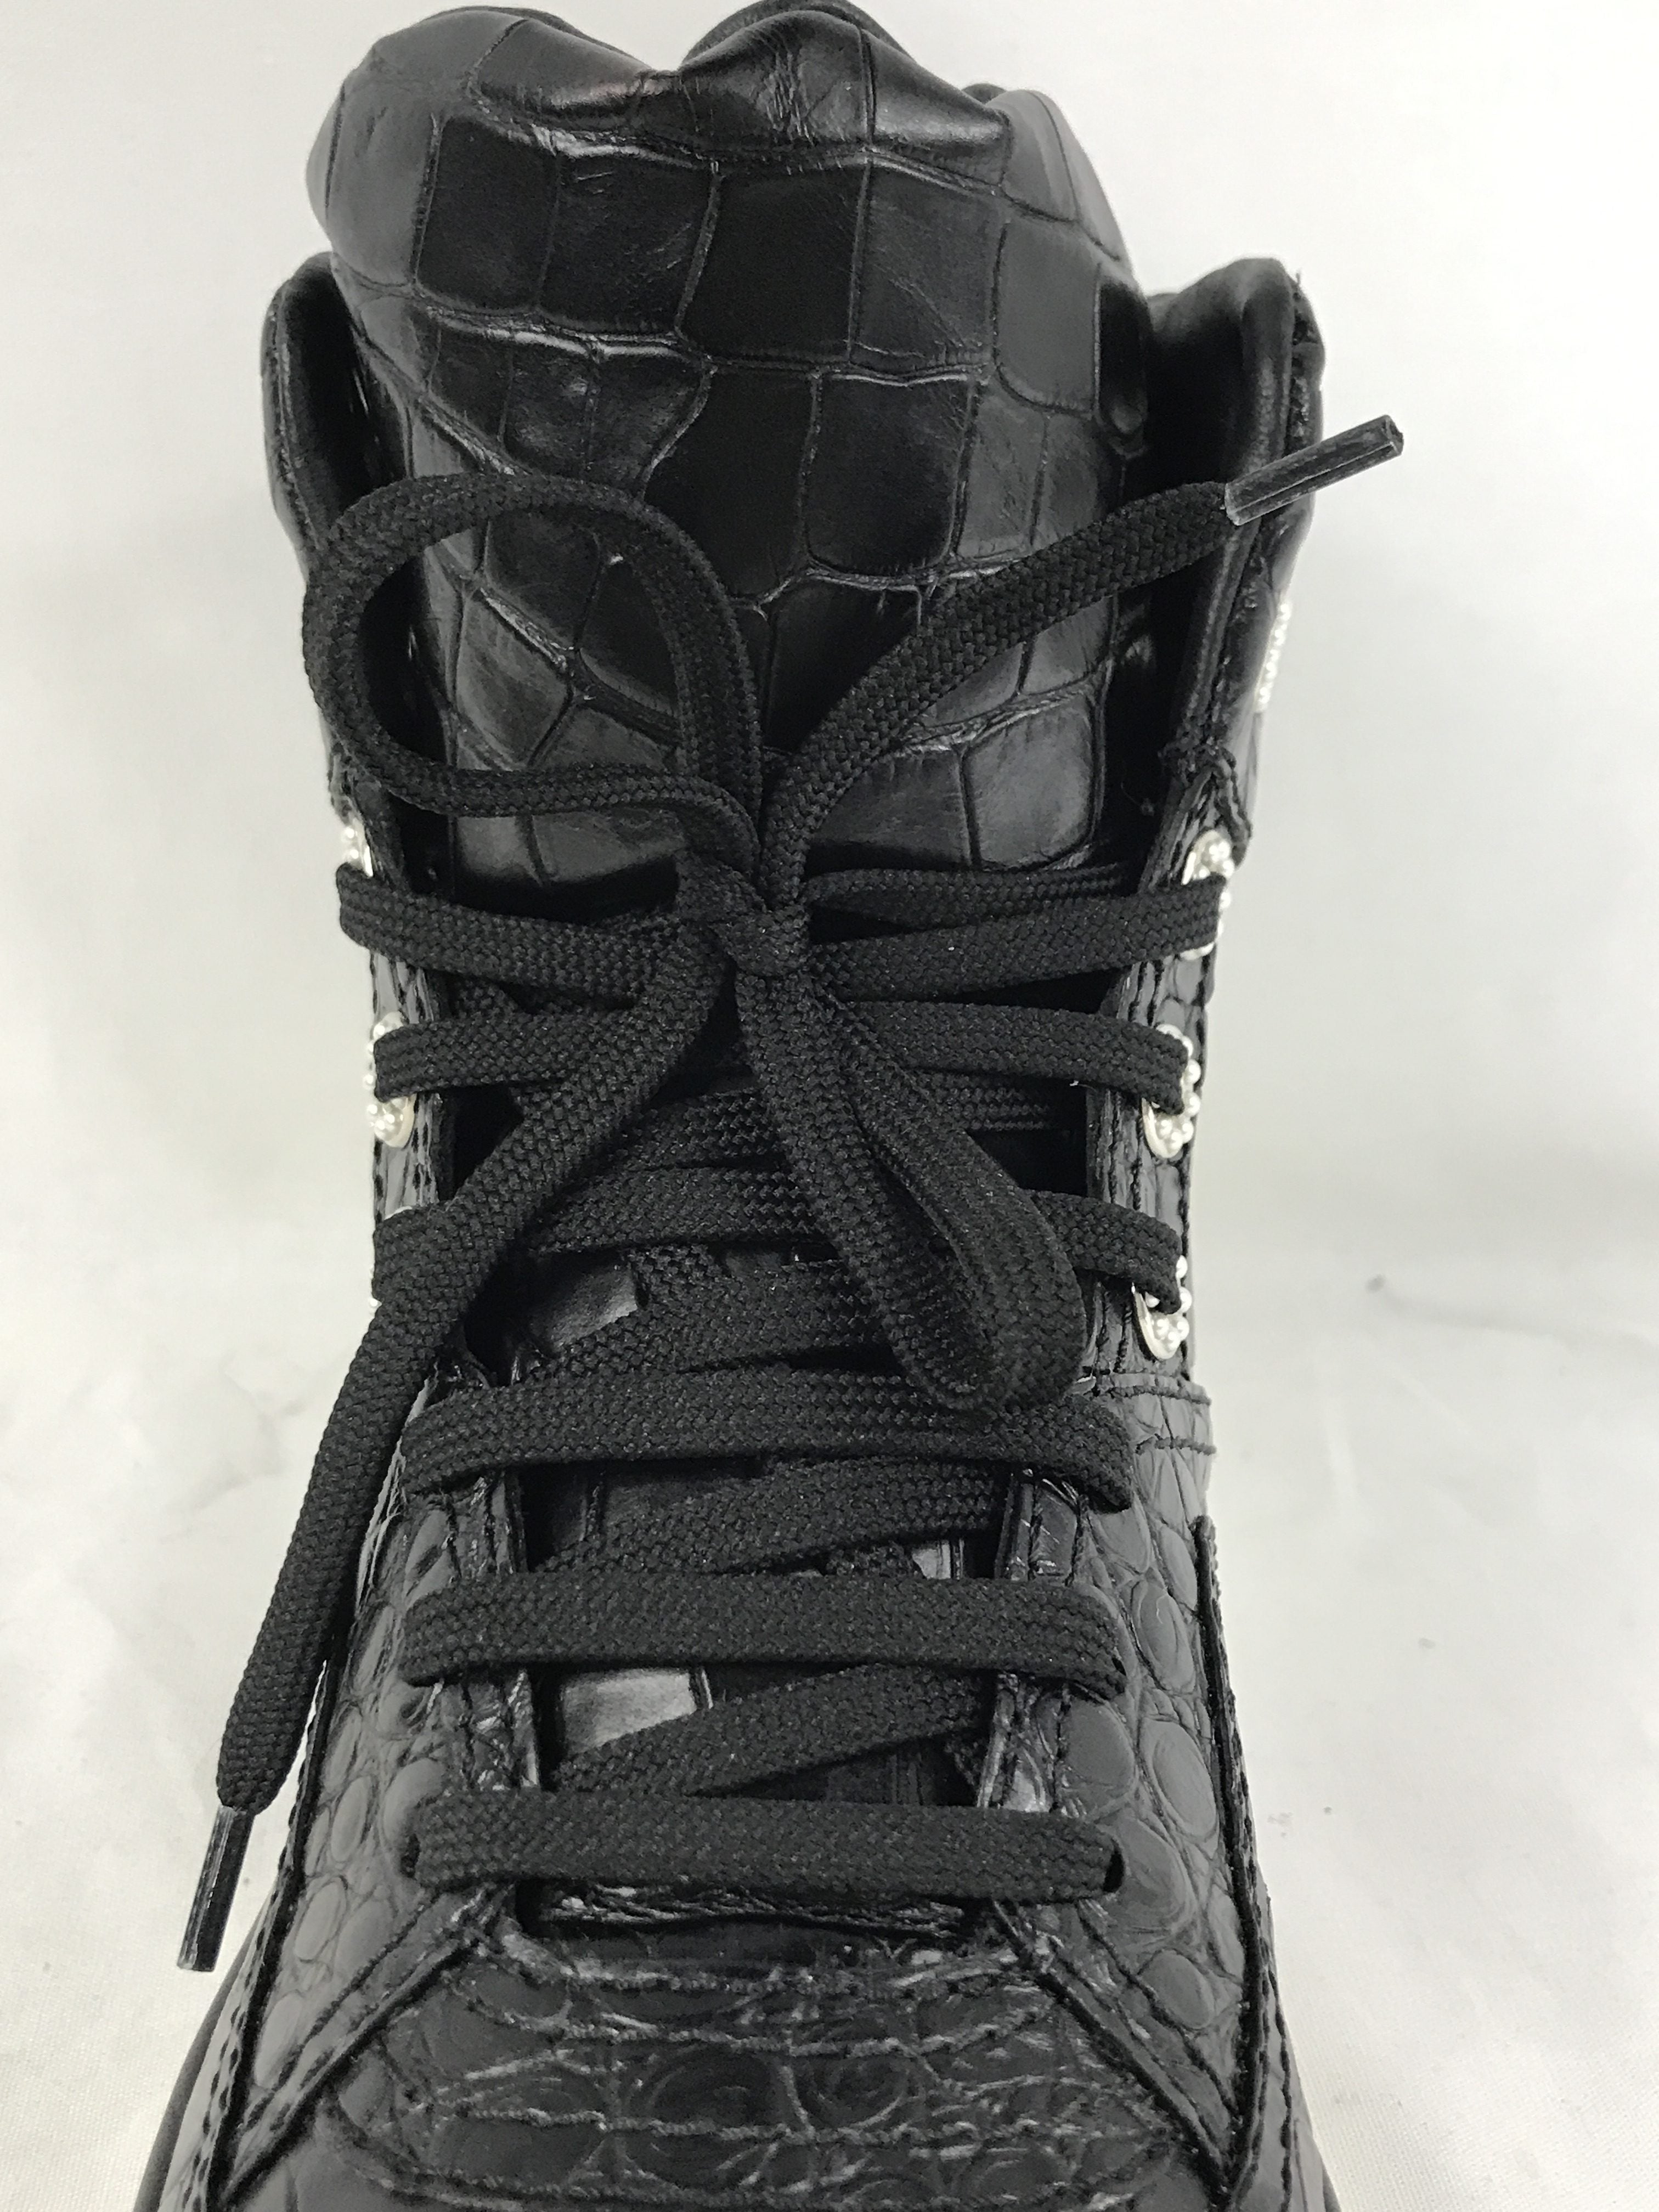 Black 19A Croc Embossed Calfskin Leather W/ accent pearls High Top Sneakers